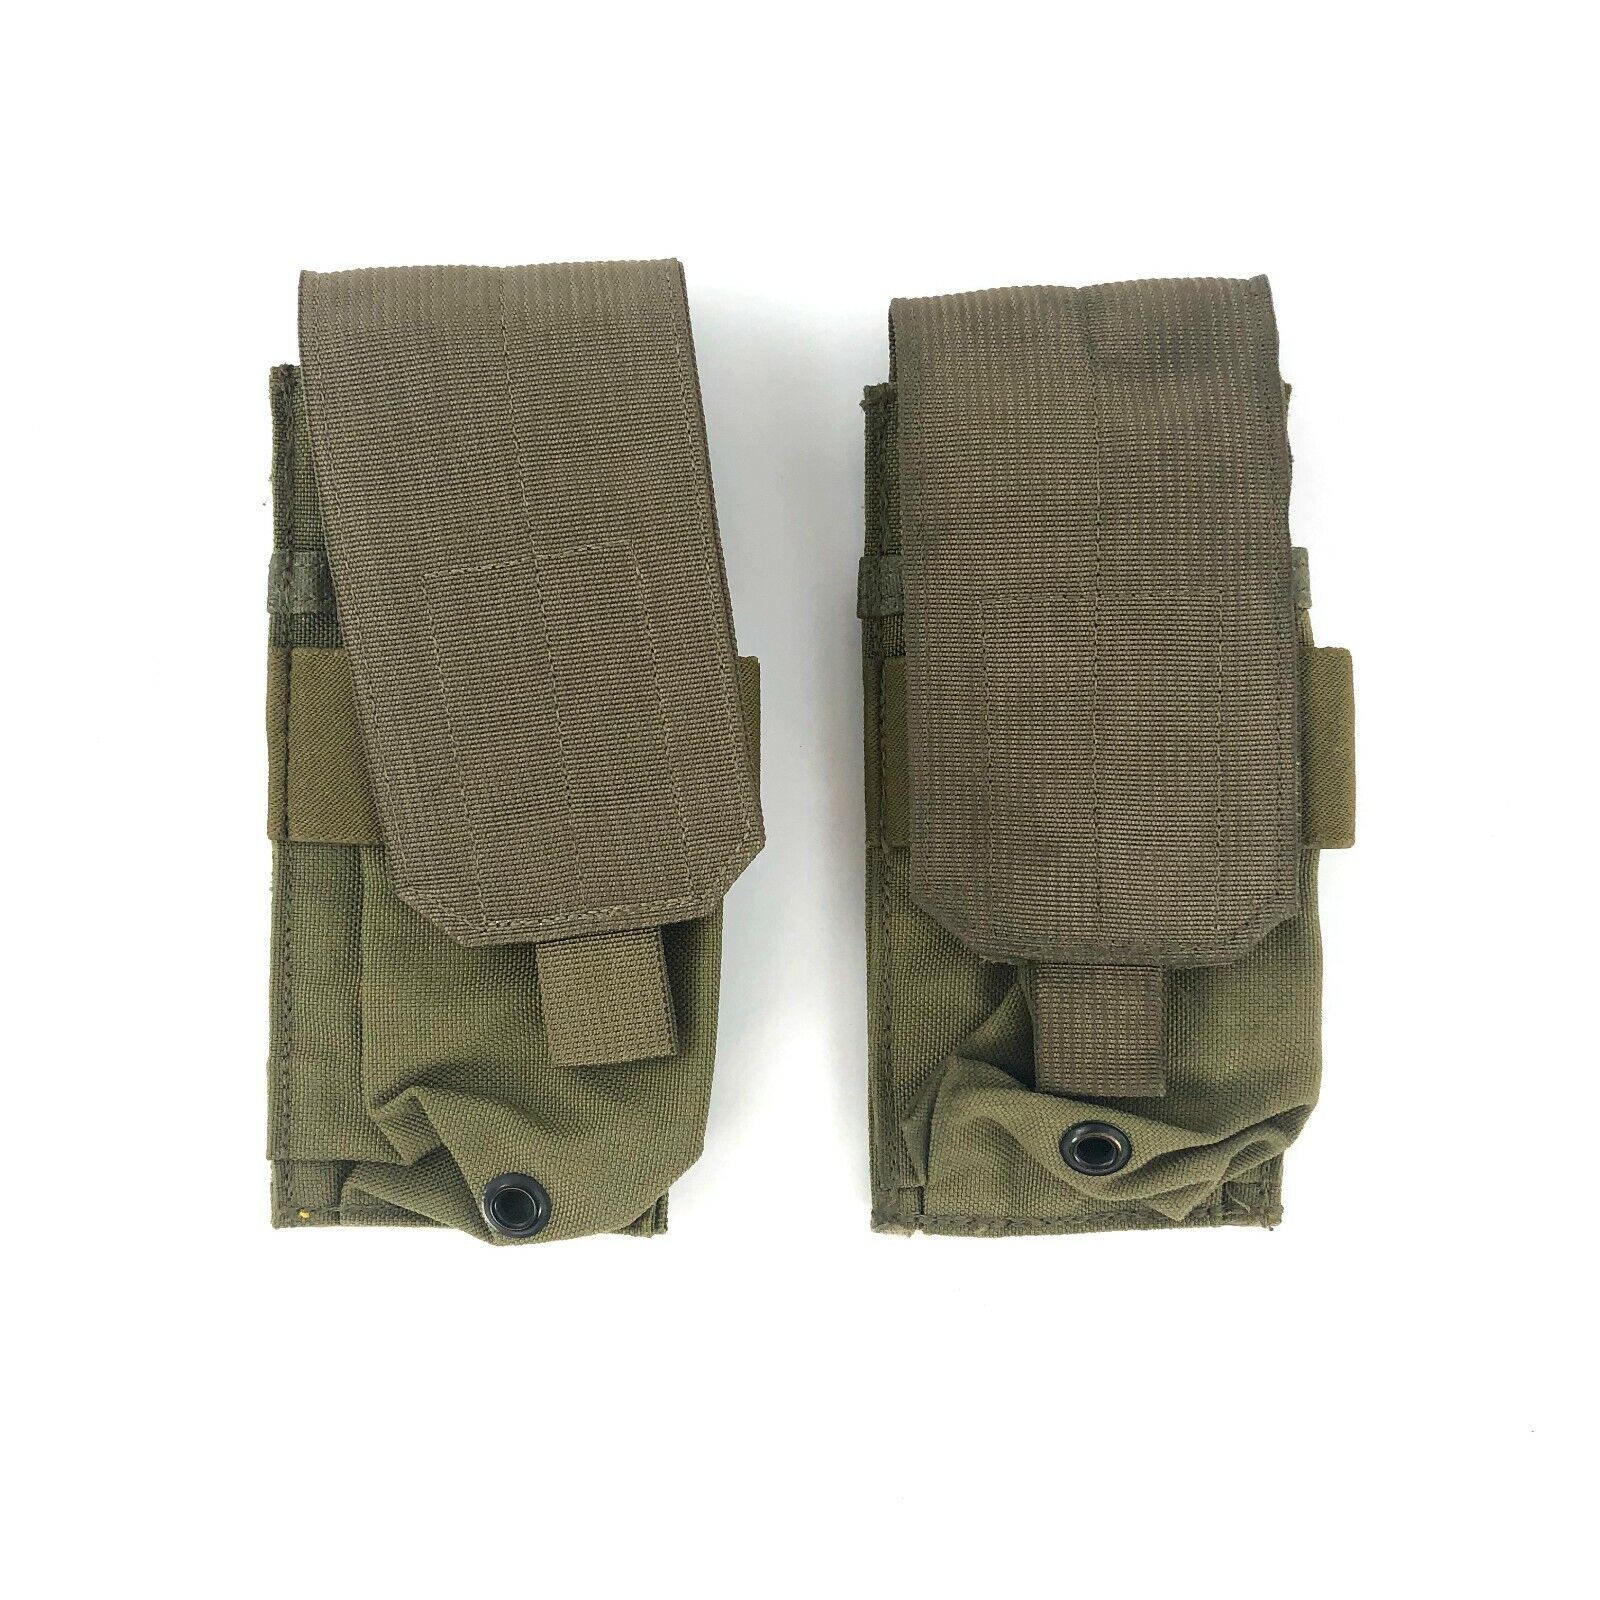 2 Eagle Industries Double Mag Pouch Stacked Magazine Khaki SFLCS Eagle Industries MP1-M4/2-MS